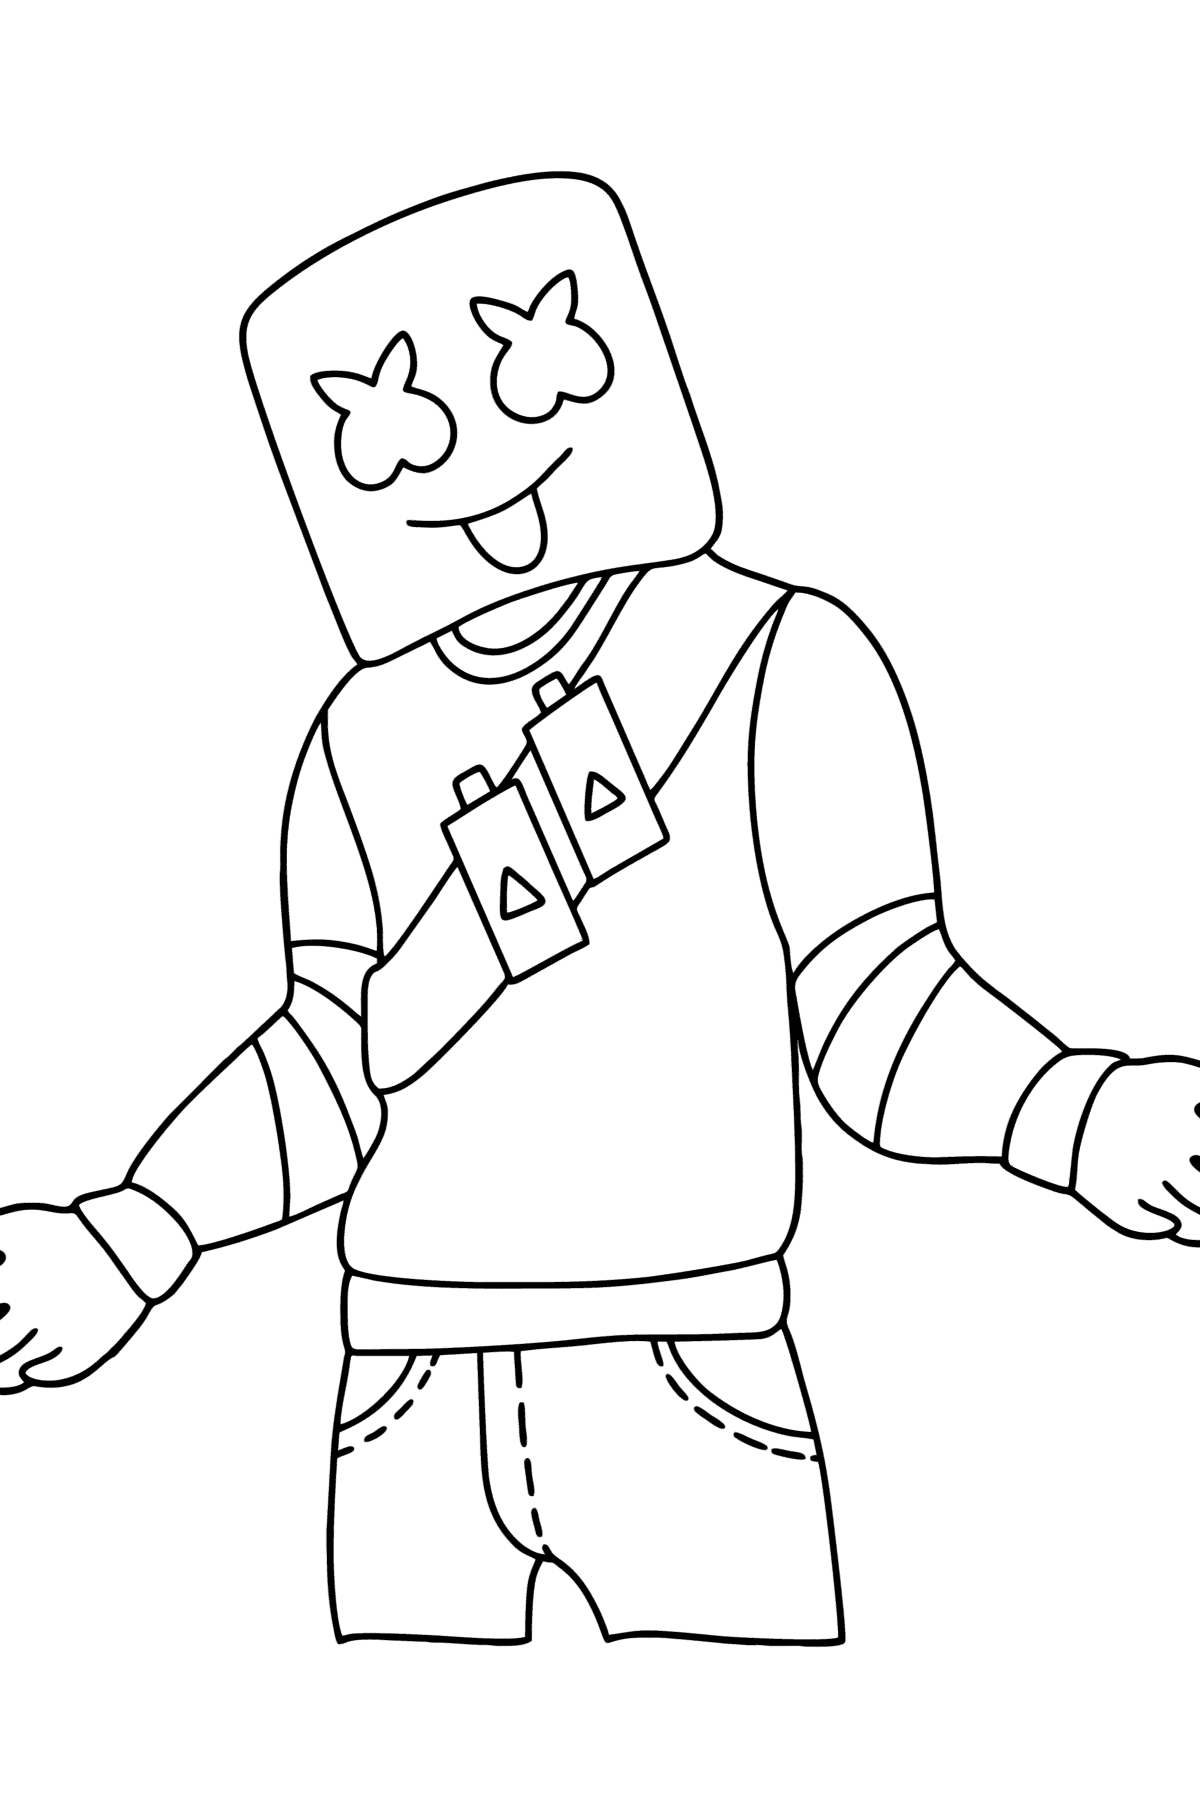 Fortnite Marshmello coloring page - Coloring Pages for Kids